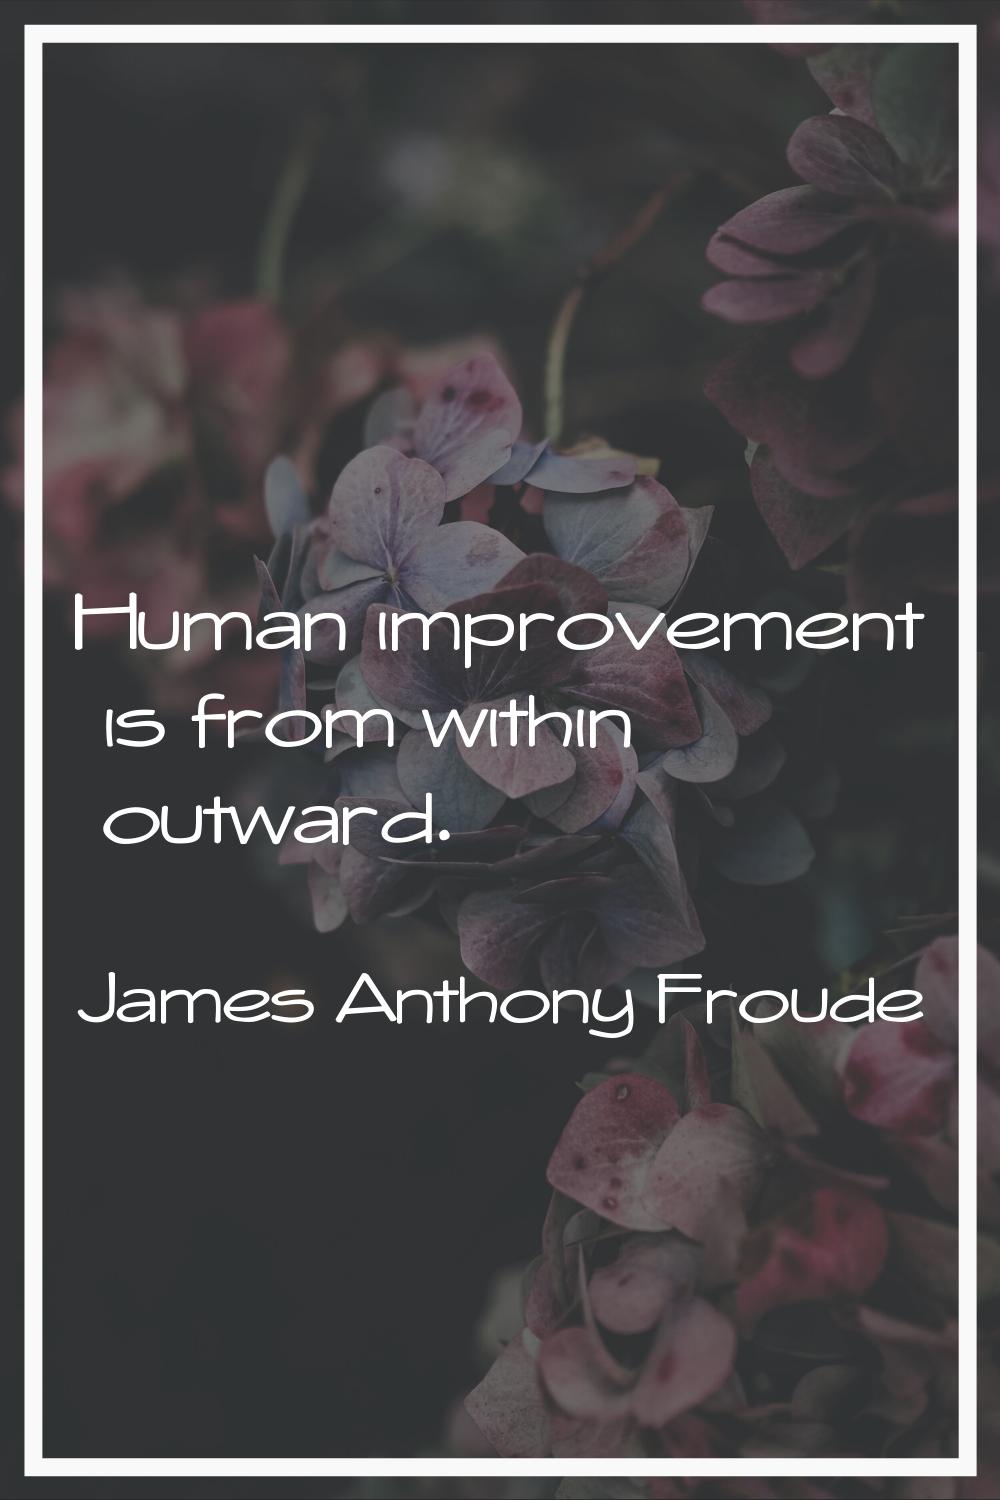 Human improvement is from within outward.